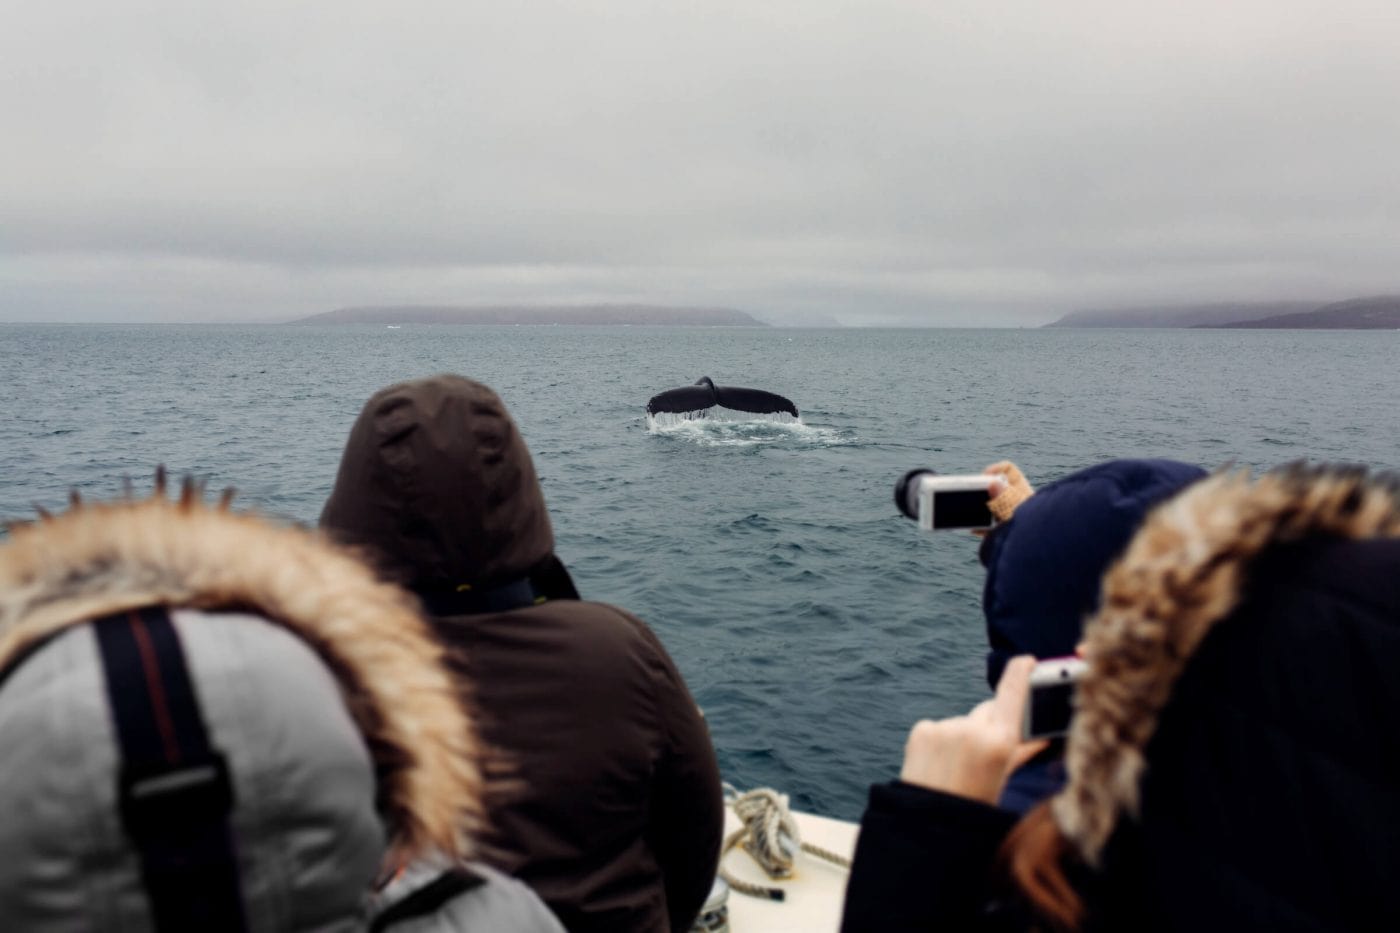 Group of tourist taking photos of a passing humpback whale in. Photo by Rebecca Gustafsson, Visit Greenland